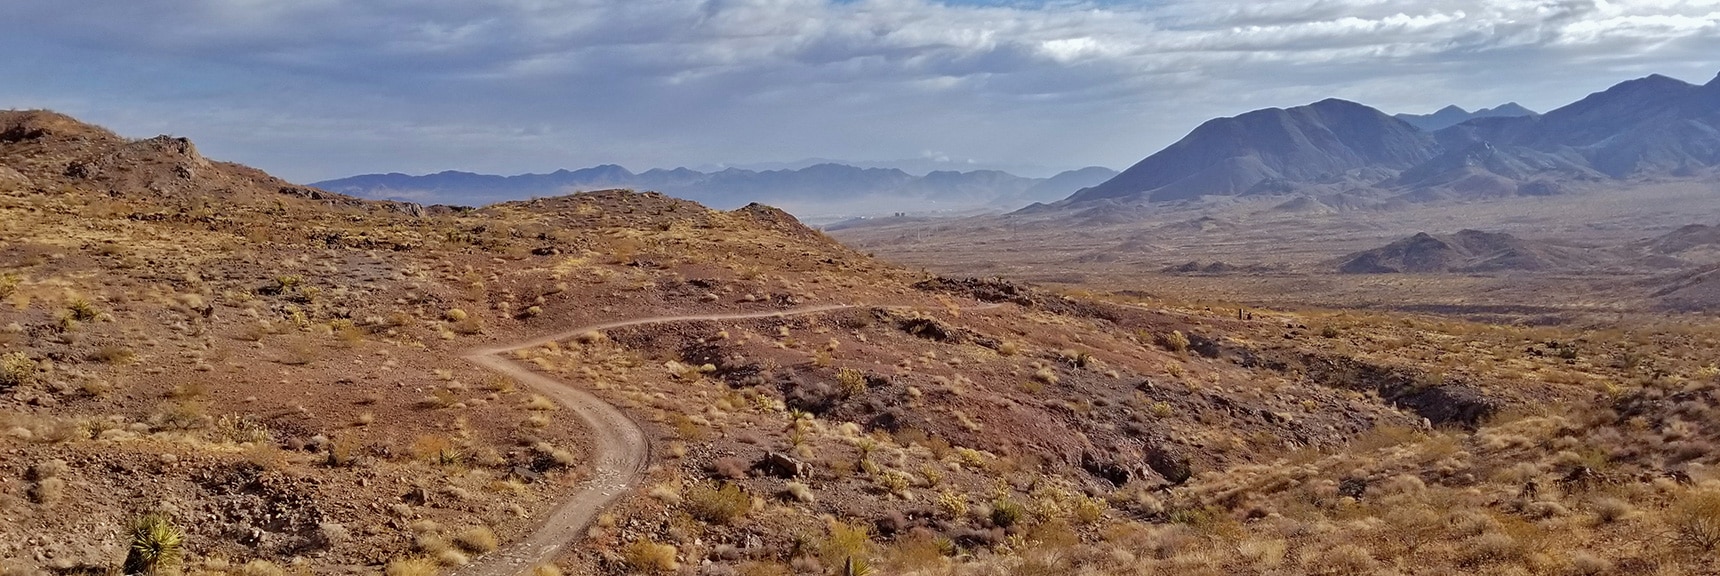 One of the Final Views Back Toward the Trailhead, Henderson and Lake Mead Area| McCullough Hills Trail in Sloan Canyon National Conservation Area, Nevada